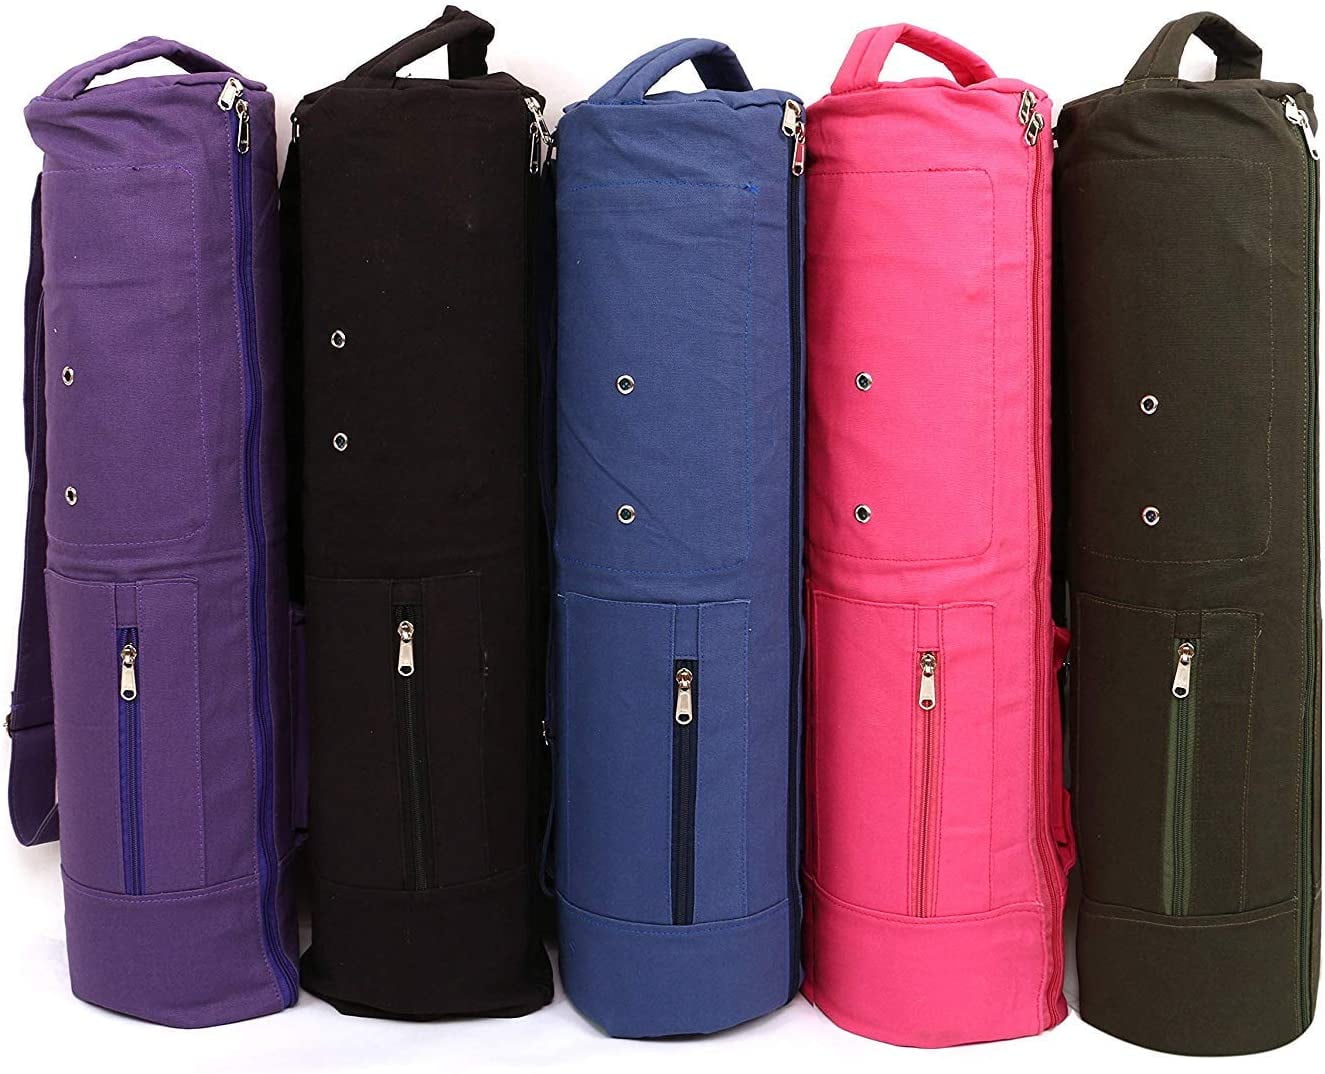 KD Yoga Bag MAT Cover Full Zip Carry Bag with Multiple Pockets Storage Area 